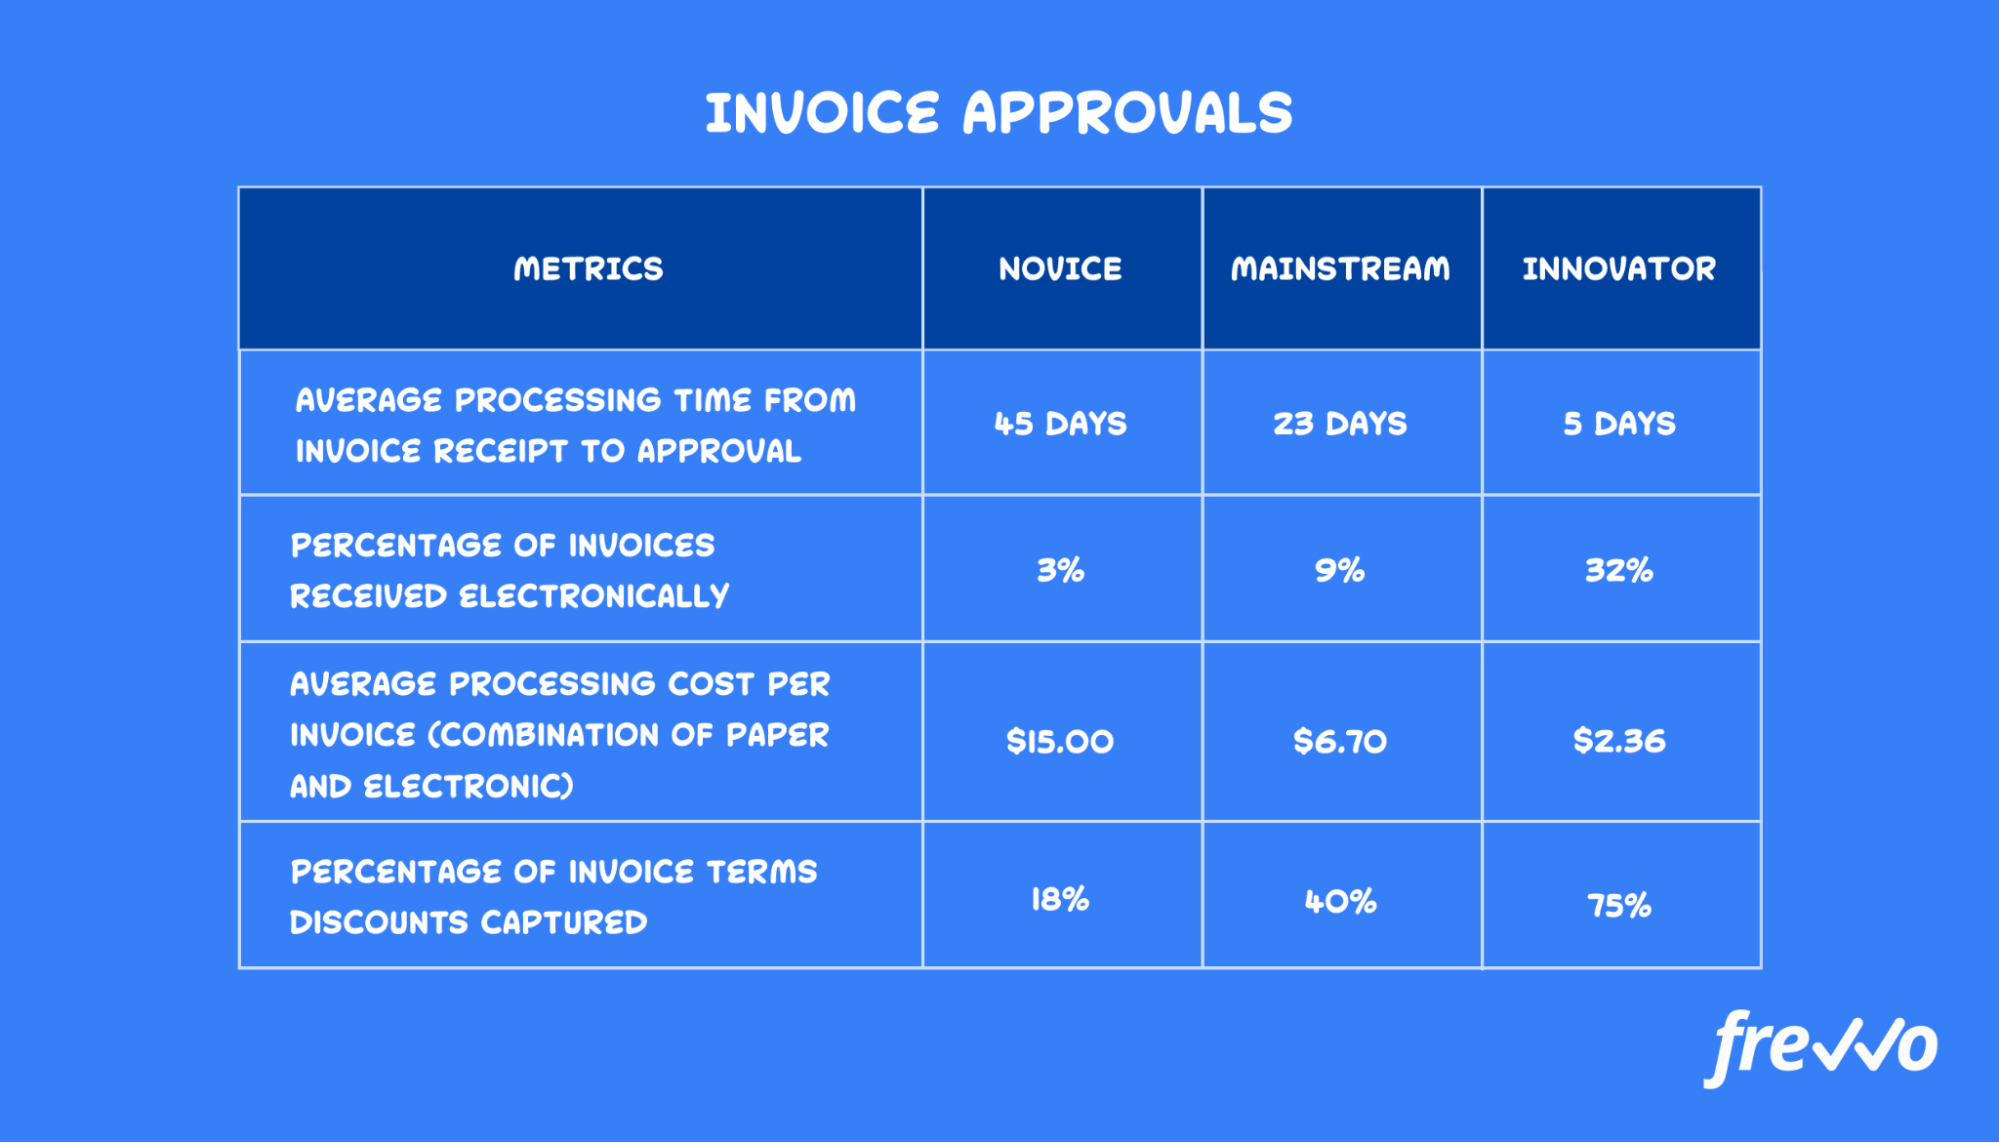 How long it takes to approval invoices on average